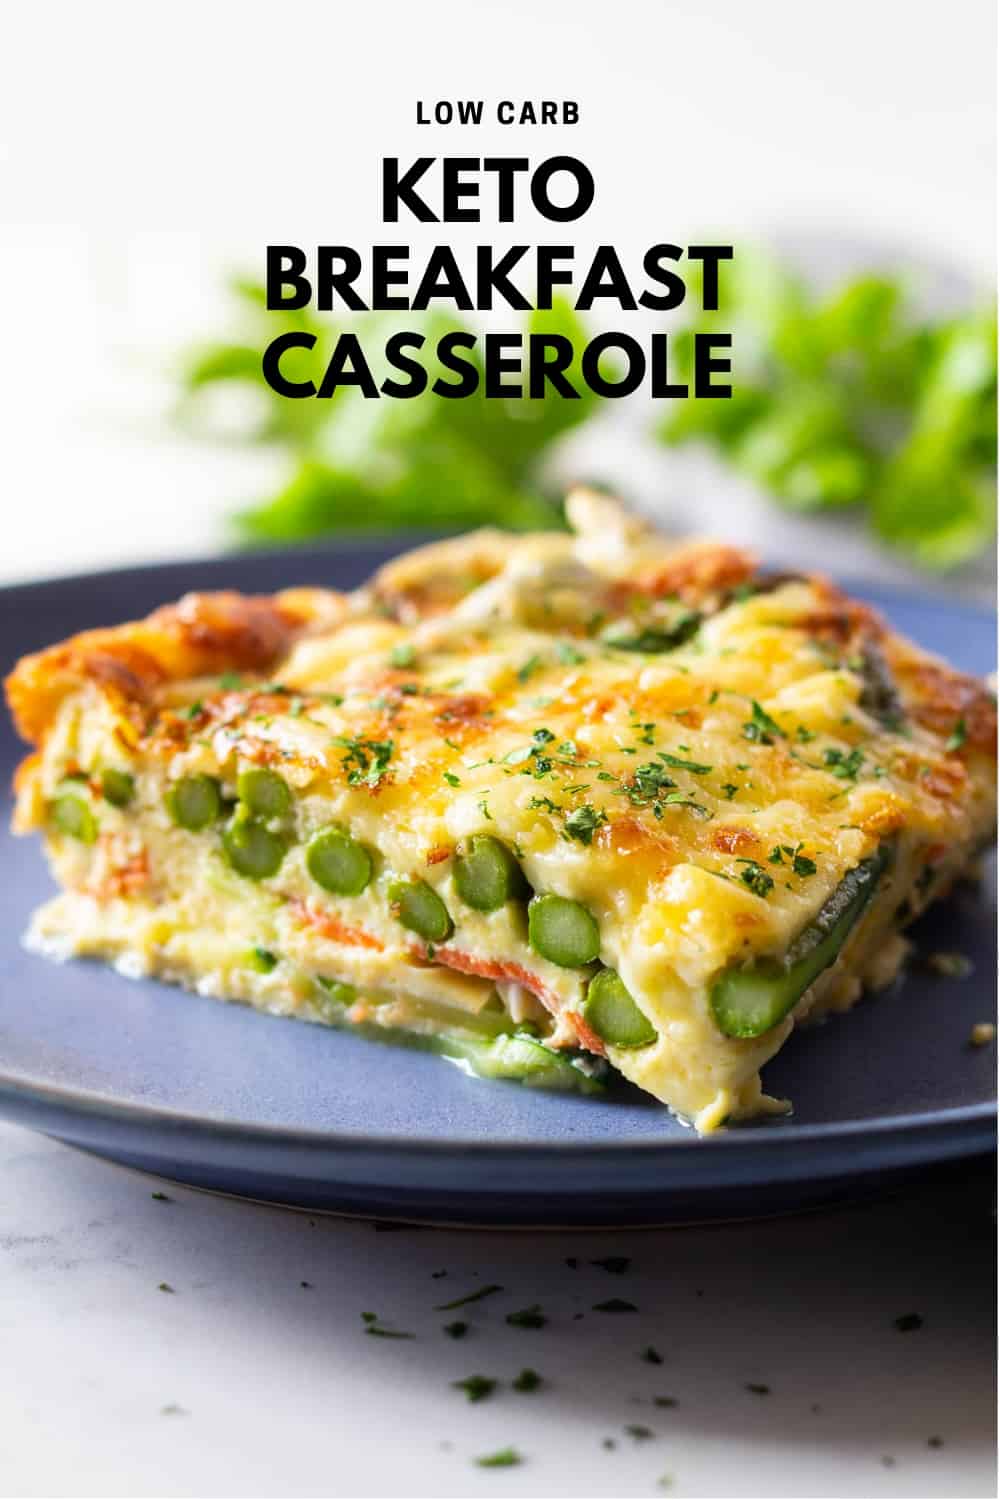 Piece of low carb breakfast casserole with asparagus and melted cheese on a blue plate